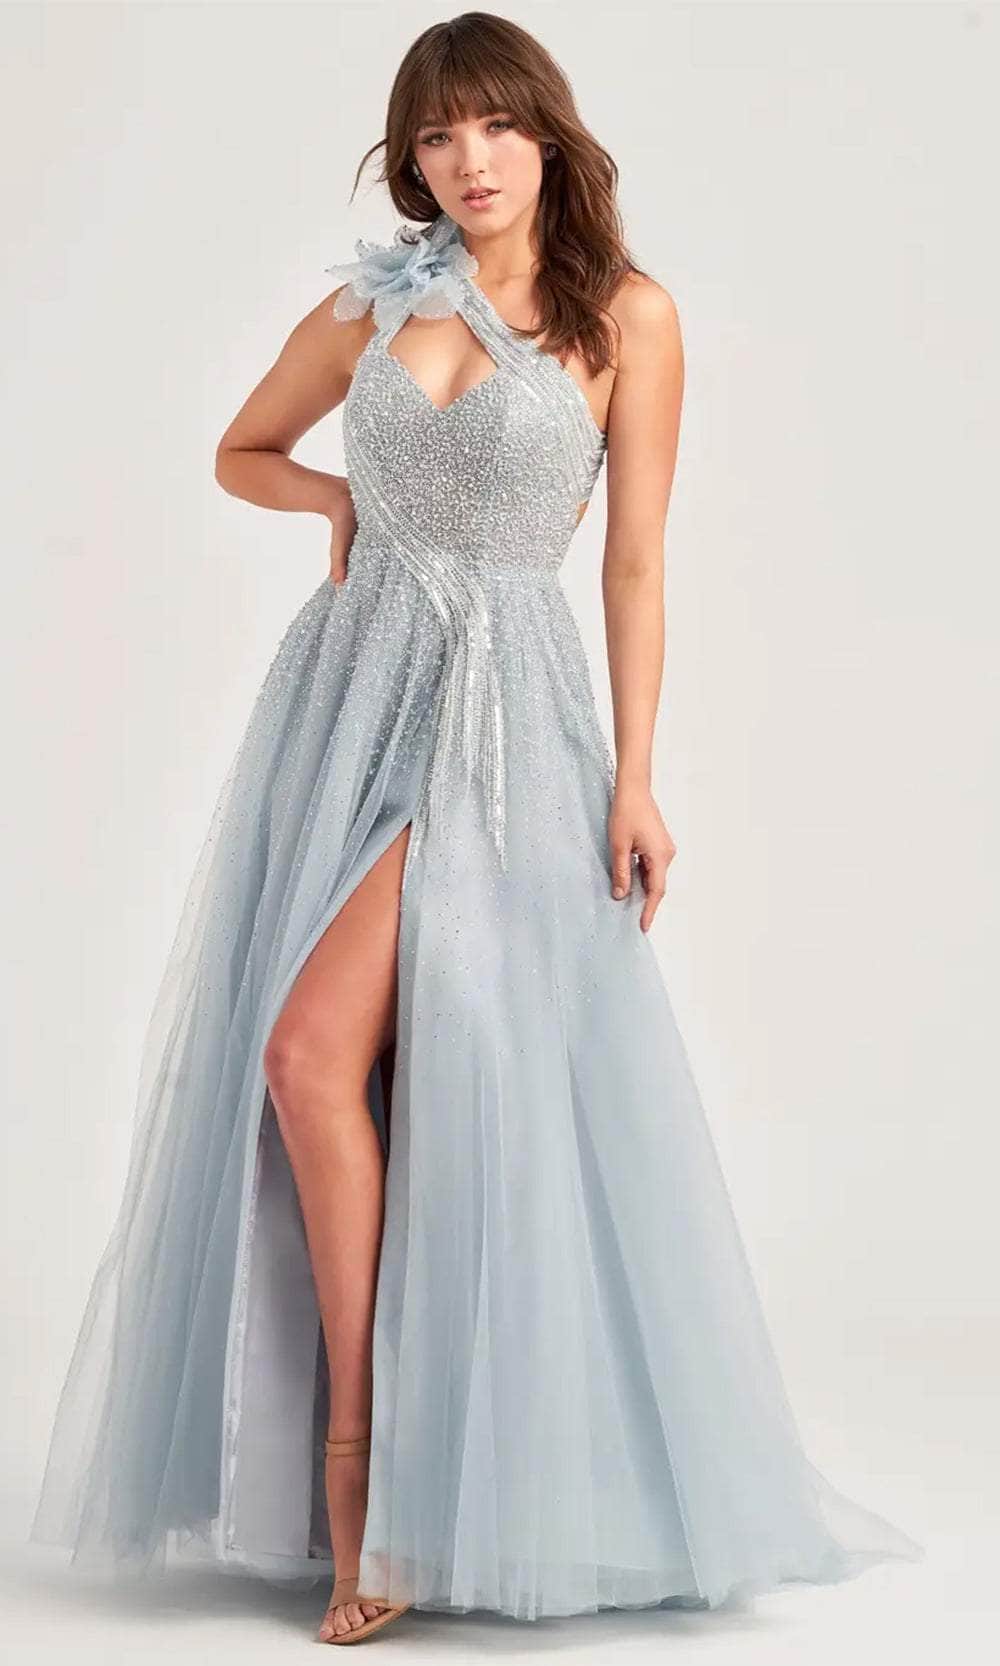 Image of Ellie Wilde EW35086 - Sweetheart Neck Rosette Accented Prom Gown